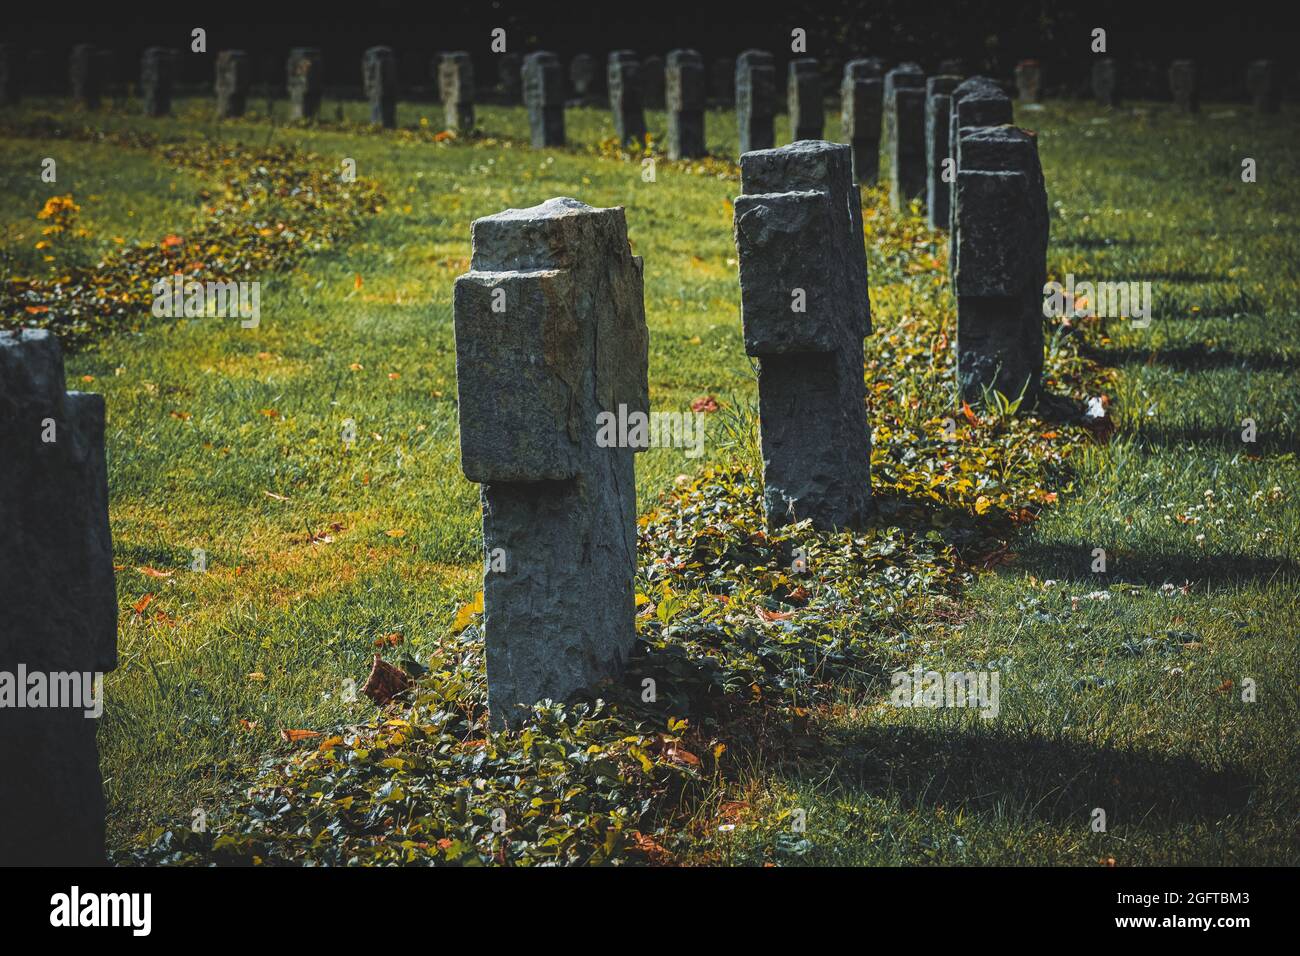 Cemetery with cross-stones and grass Stock Photo